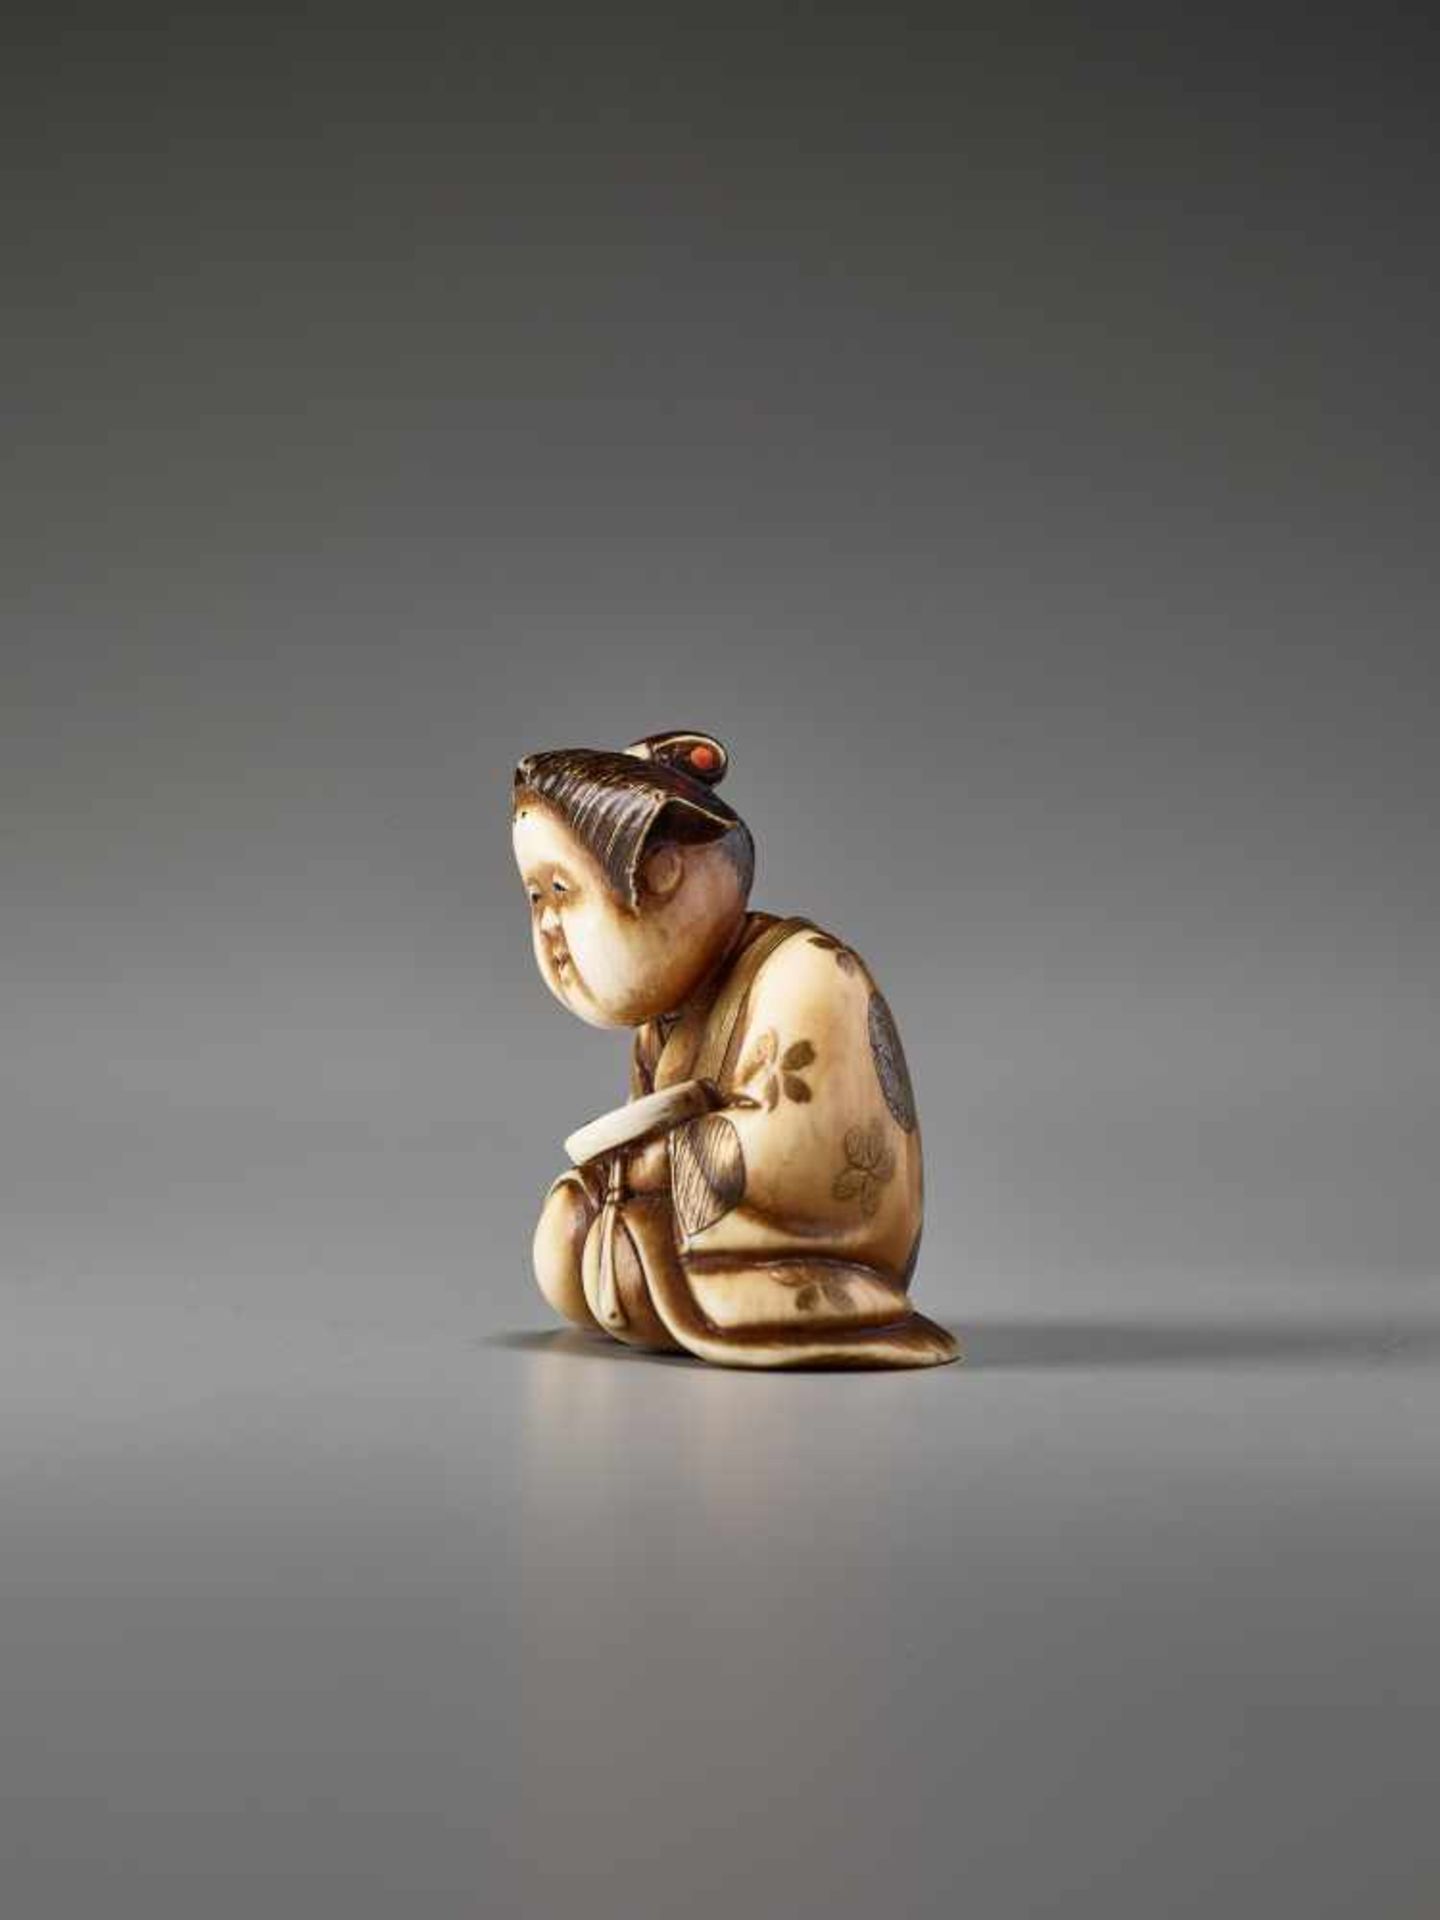 AN IVORY AND LACQUER NETSUKE OF OKAME WITH A SAKE CUP BY KEIMIN By Keimin, ivory netsuke with gold - Image 4 of 7